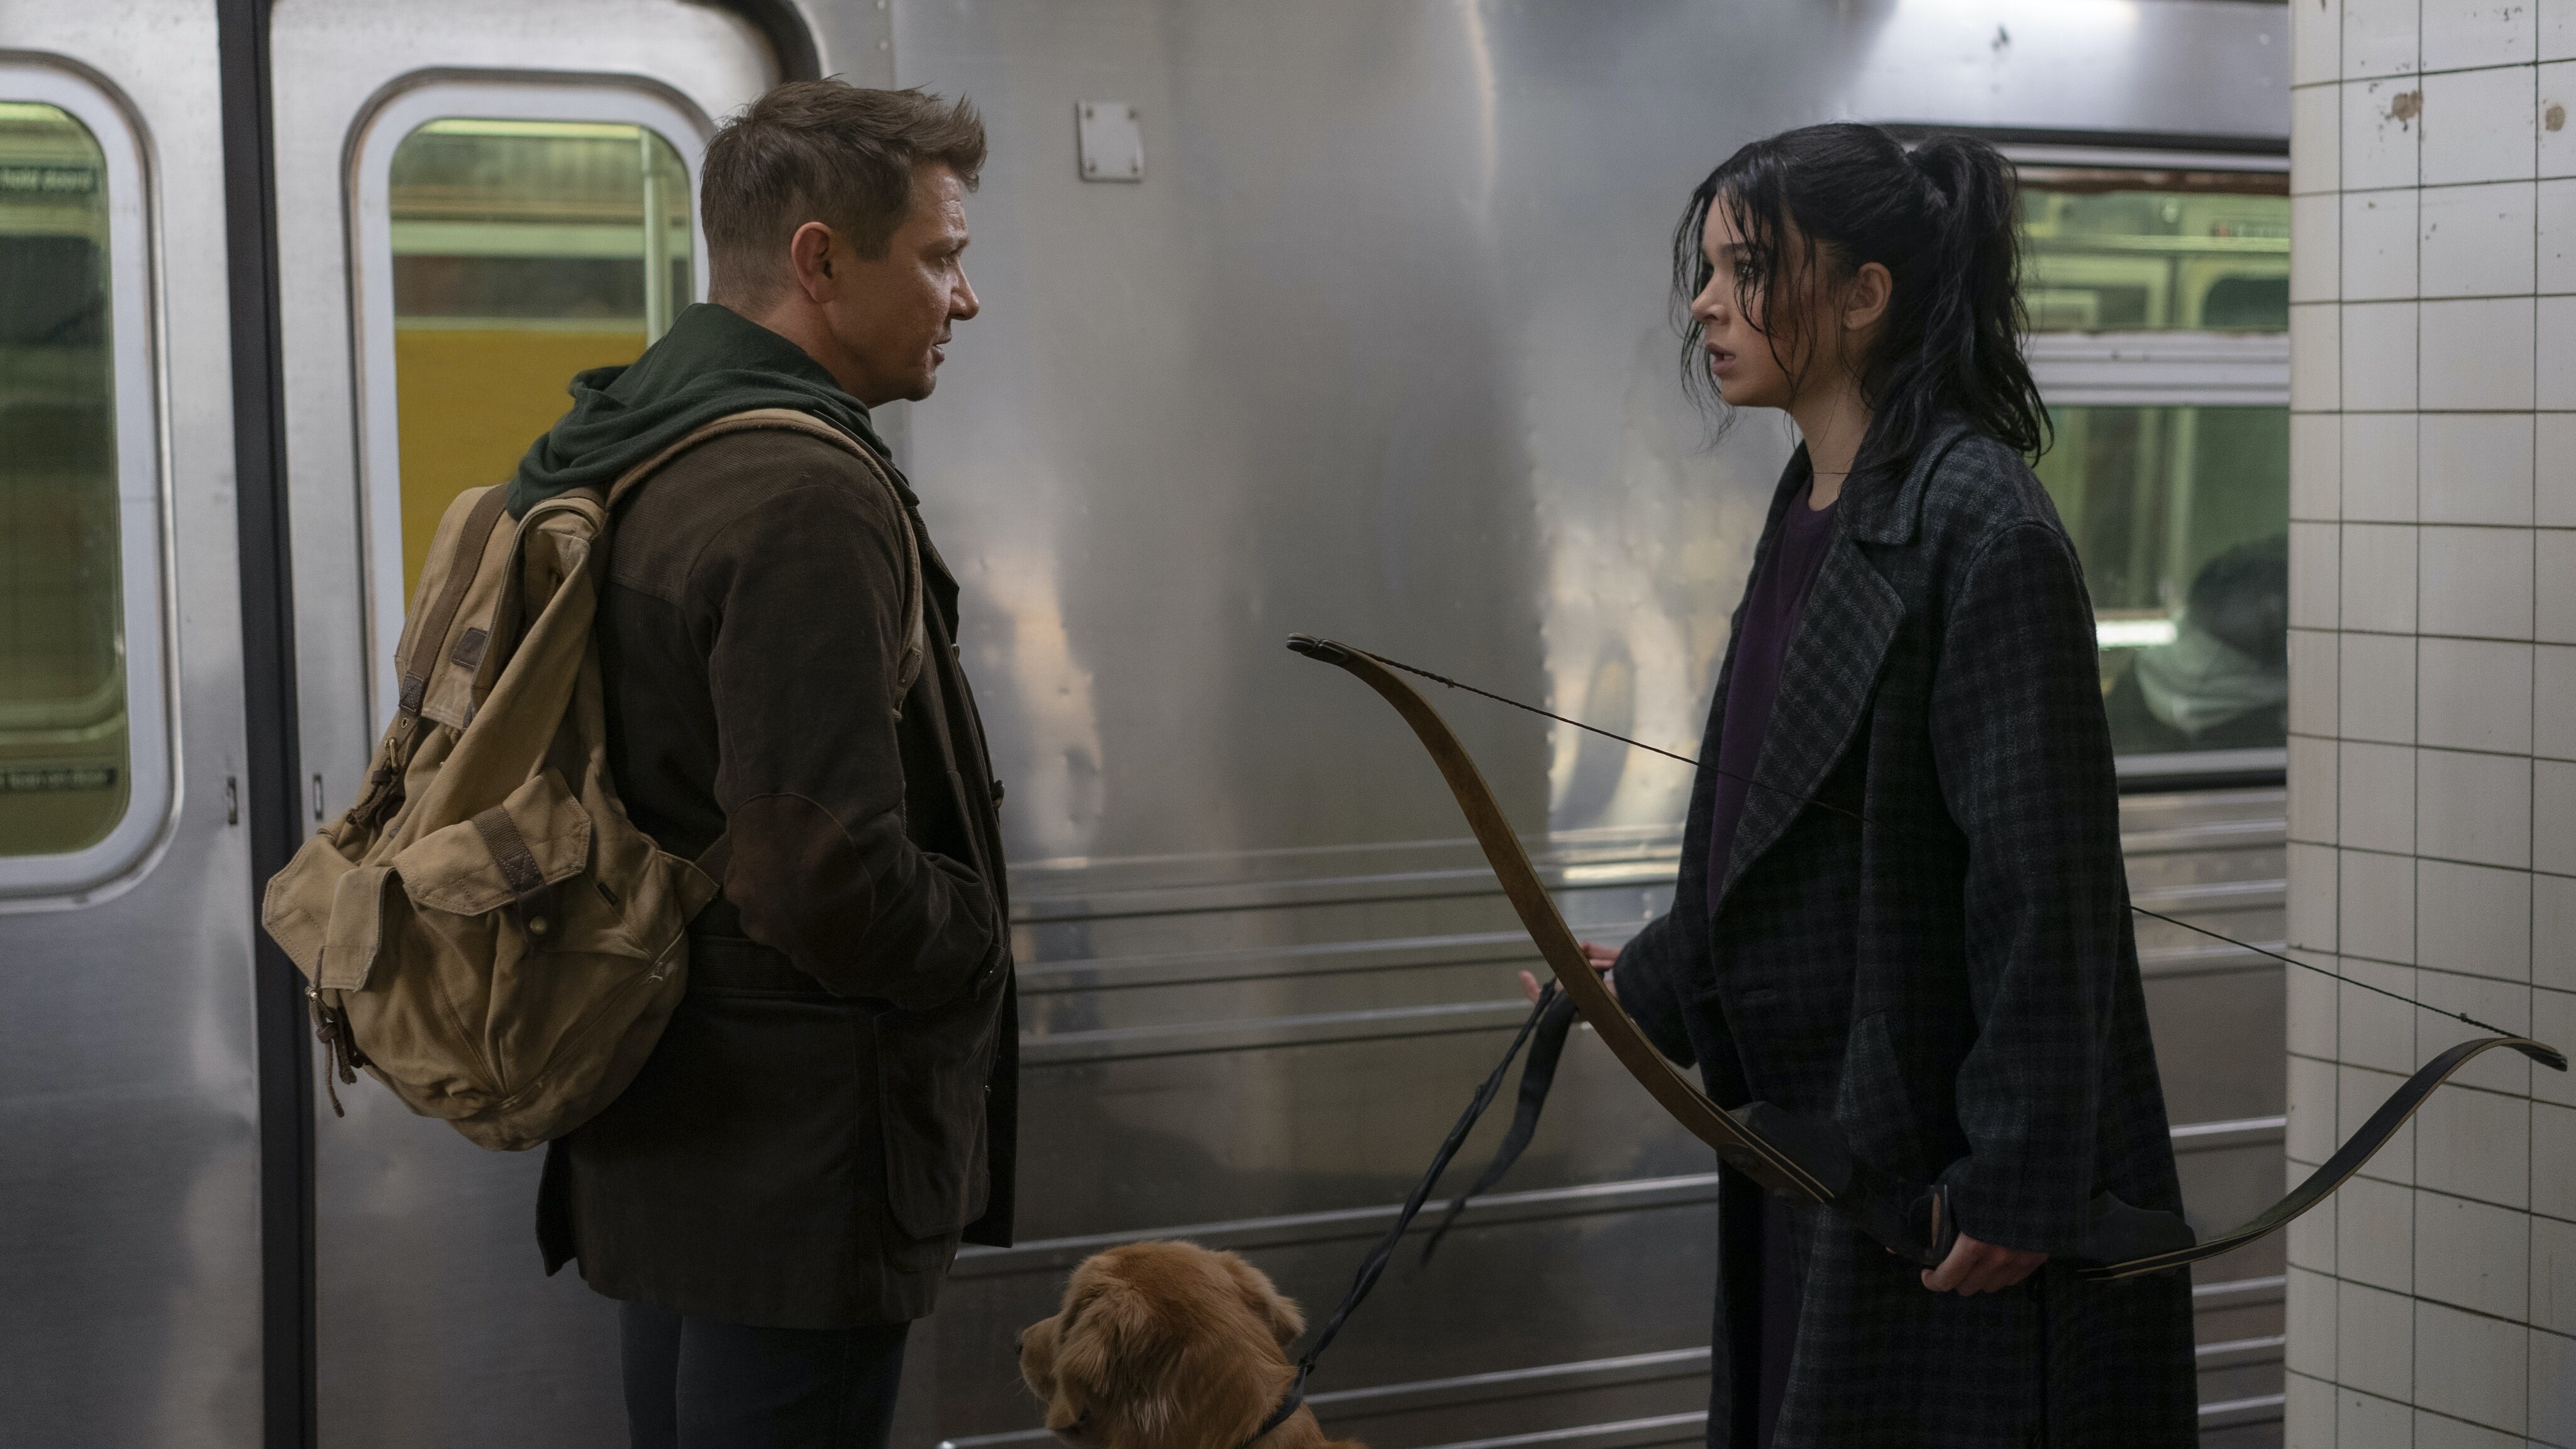 (L-R): Hawkeye/Clint Barton (Jeremy Renner) and Kate Bishop (Hailee Steinfeld) in Marvel Studios' LOKI, exclusively on Disney+. Photo by Mary Cybulski. ©Marvel Studios 2021. All Rights Reserved. 